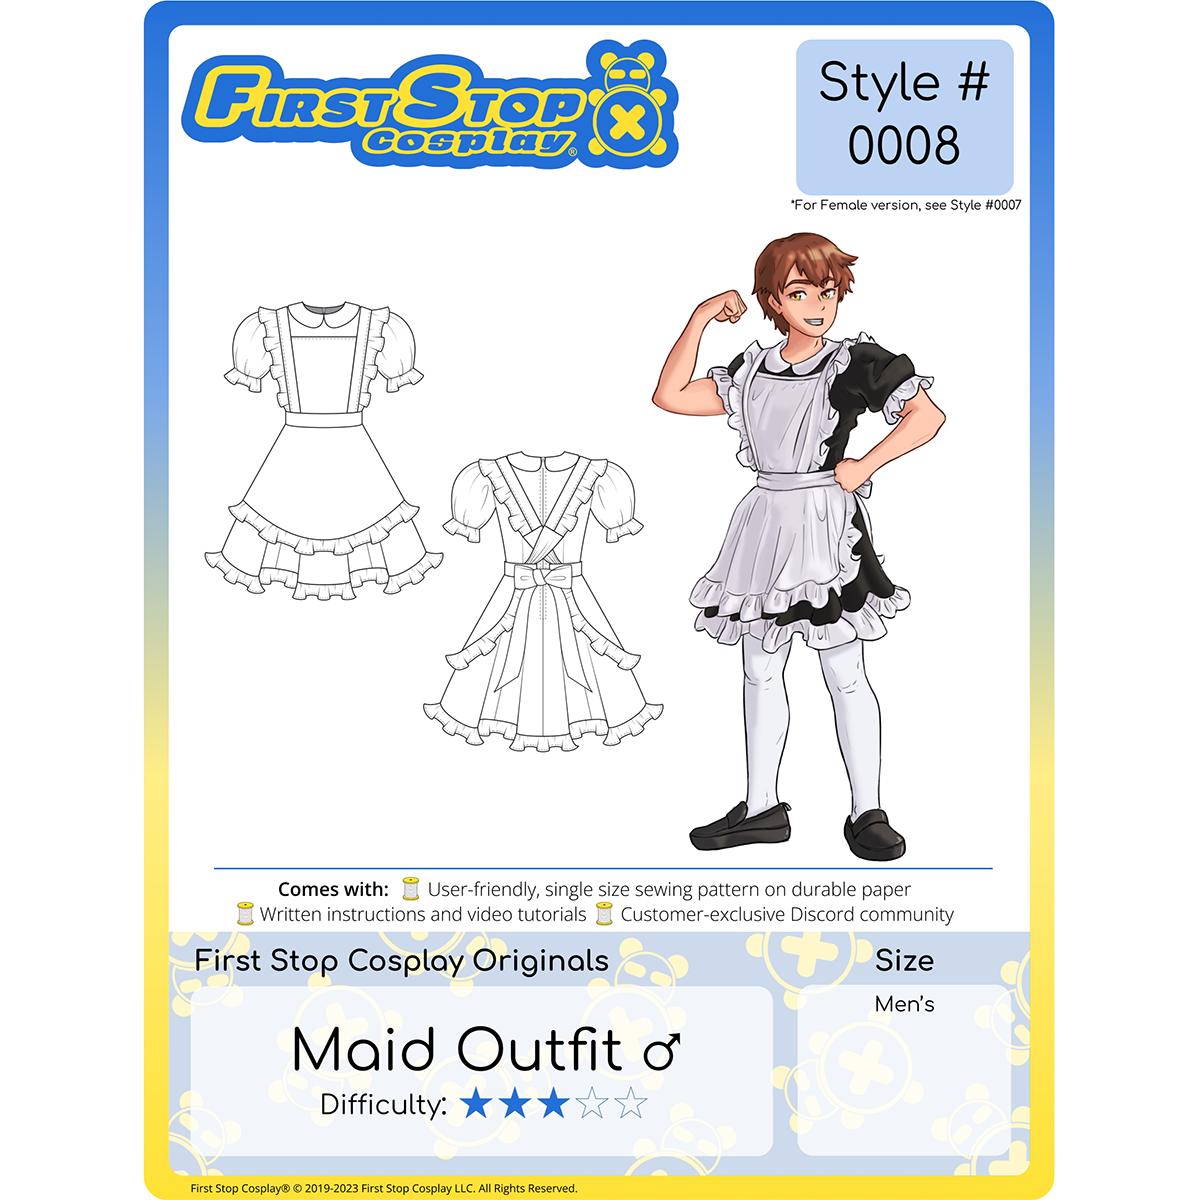 A graphic of the front packaging for Style #0008- Maid Outfit (Male). The First Stop Cosplay logo is in the top left corner. Below the logo is line art of the completed pattern. To the right is an image of our male character, Dah, wearing the completed Maid Outfit (Male). This pattern is 3 star in difficulty rating and follows our men's size chart.